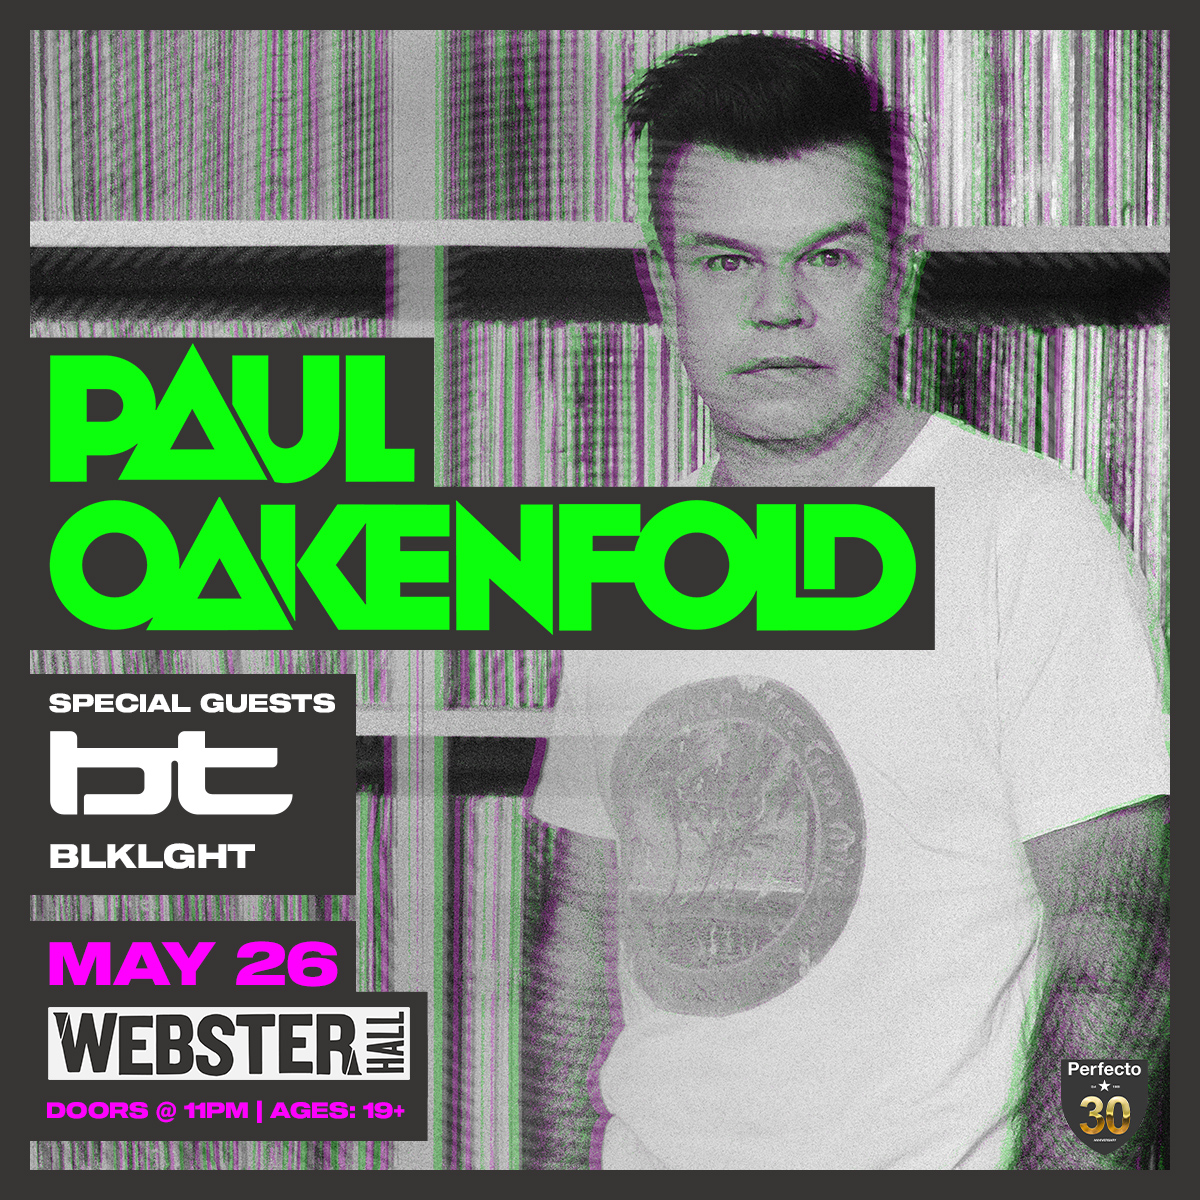 blklght is joining Paul Oakenfold here on May 26 ⚡️ tickets are on sale NOW